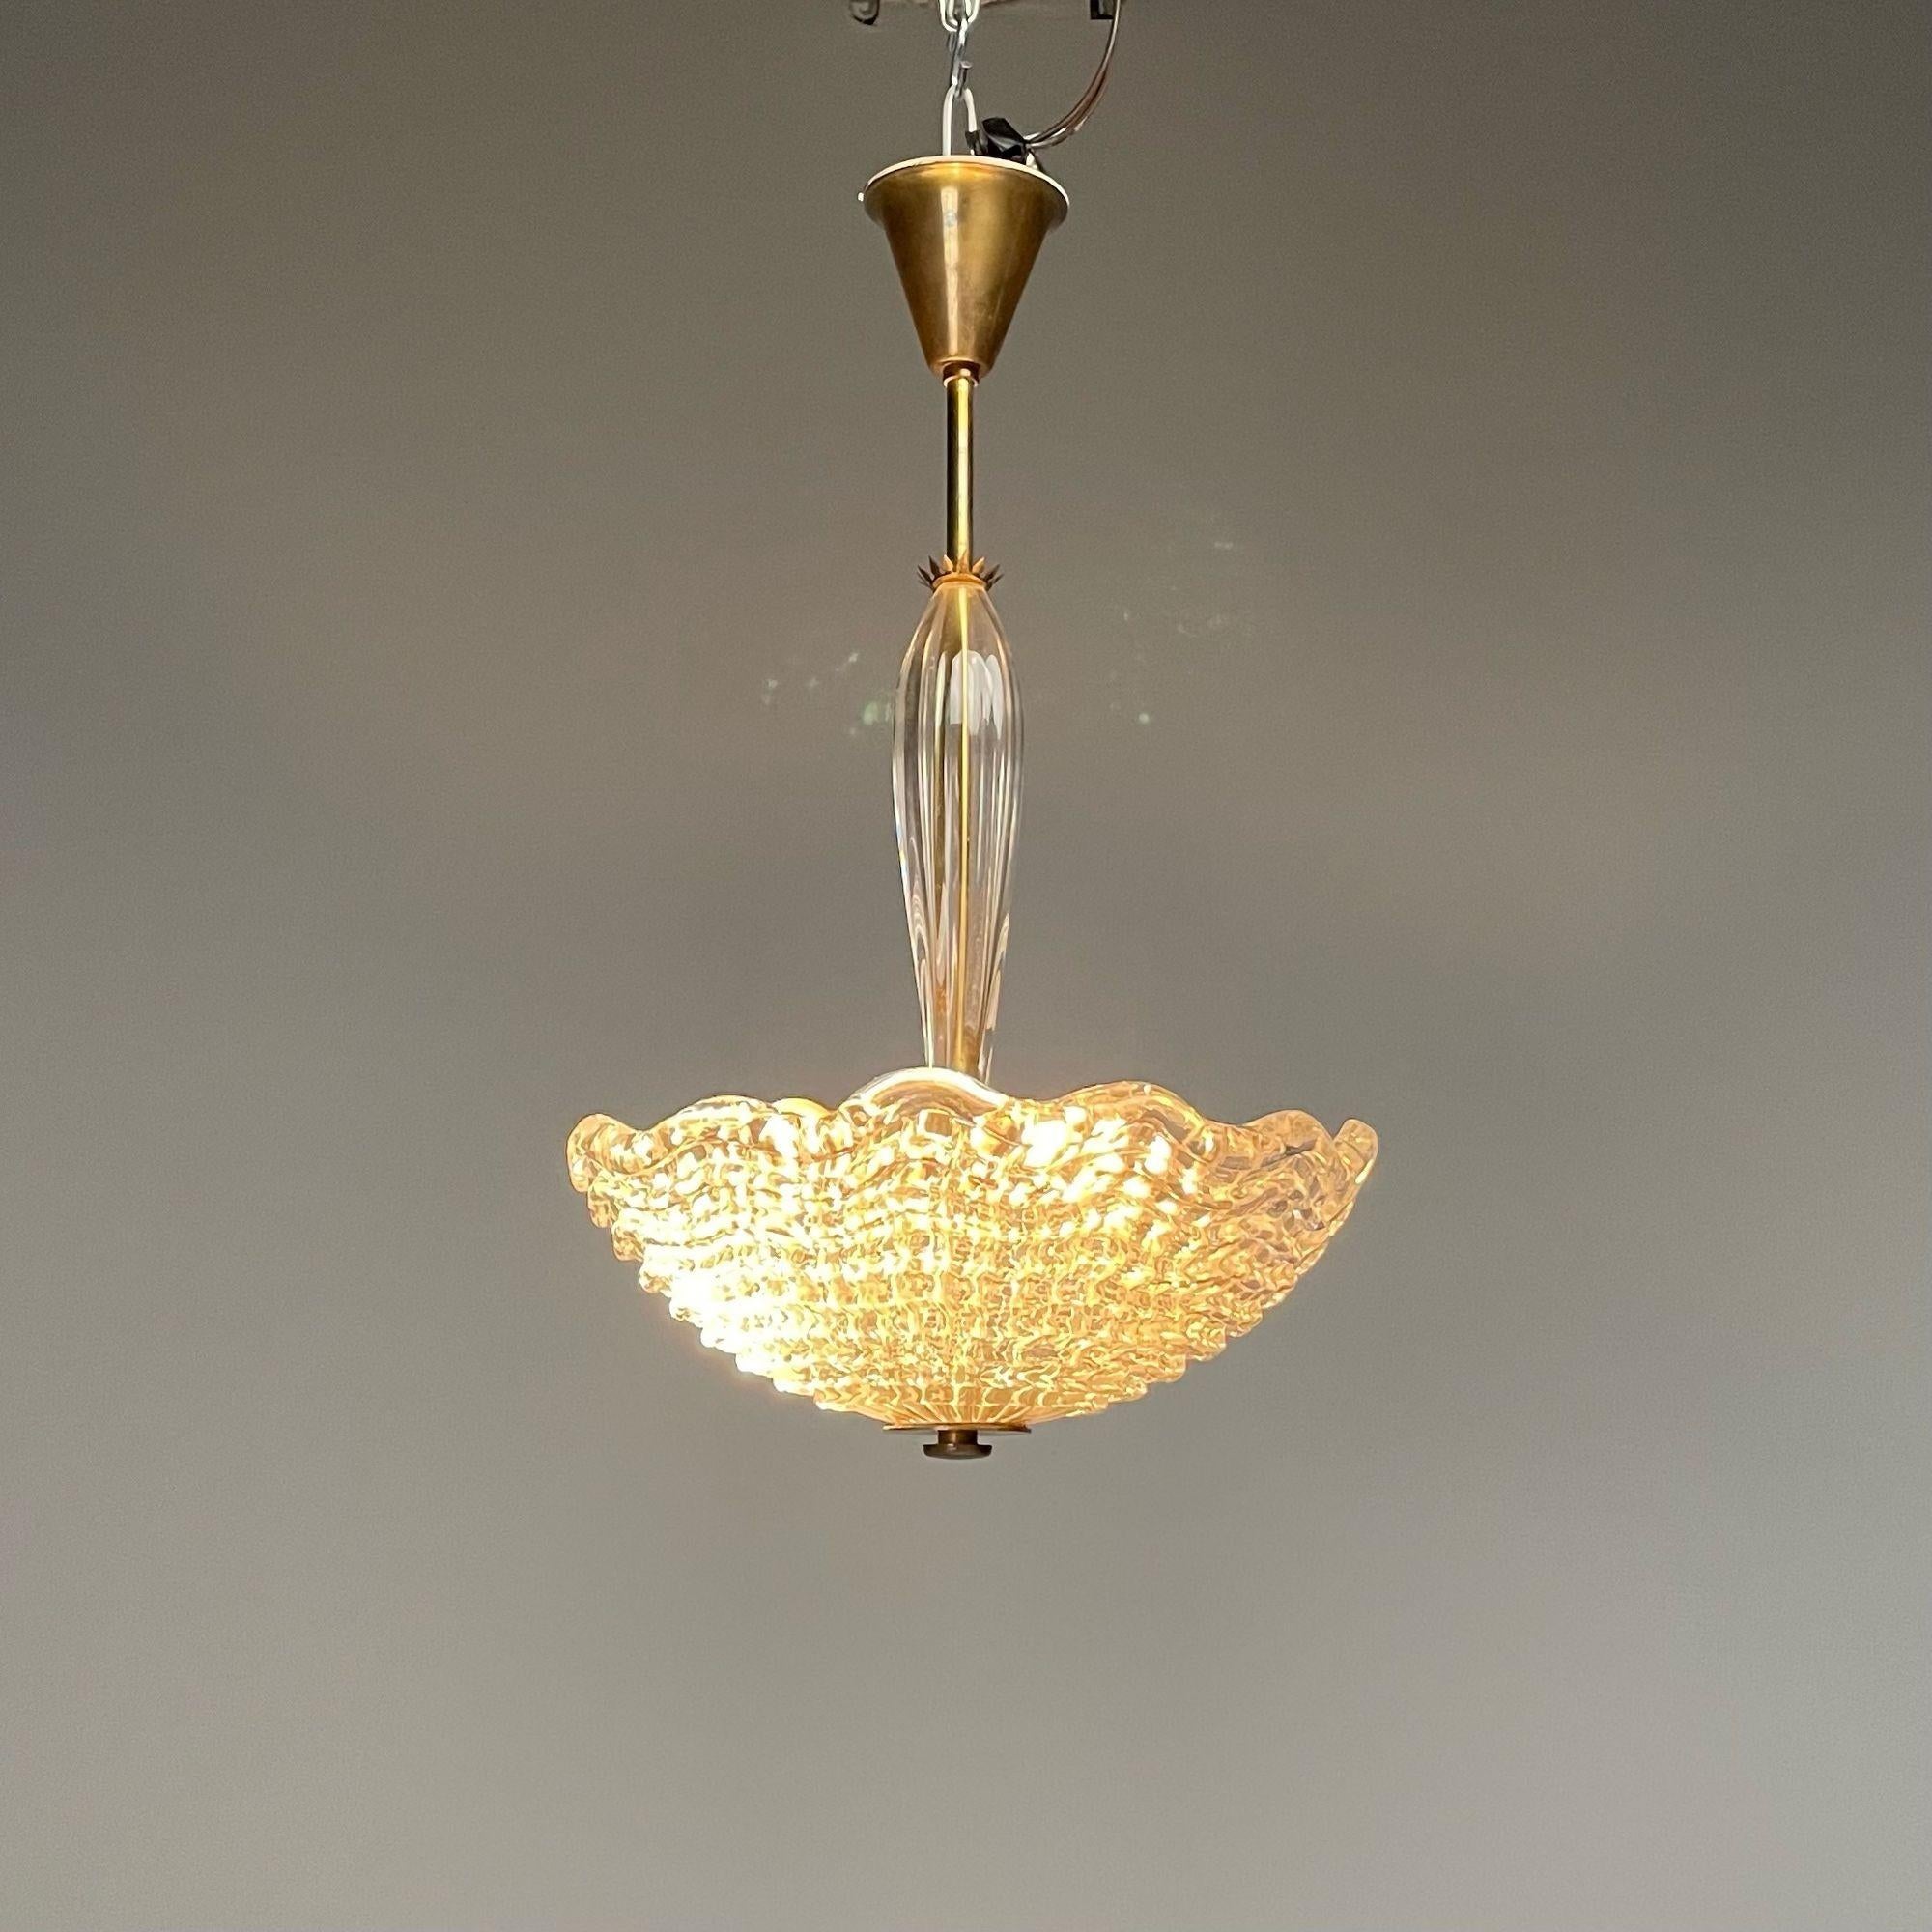 Carl Fagerlund, Orrefors, Swedish Mid-Century Modern, Chandelier, Glass, 1940s In Good Condition For Sale In Stamford, CT